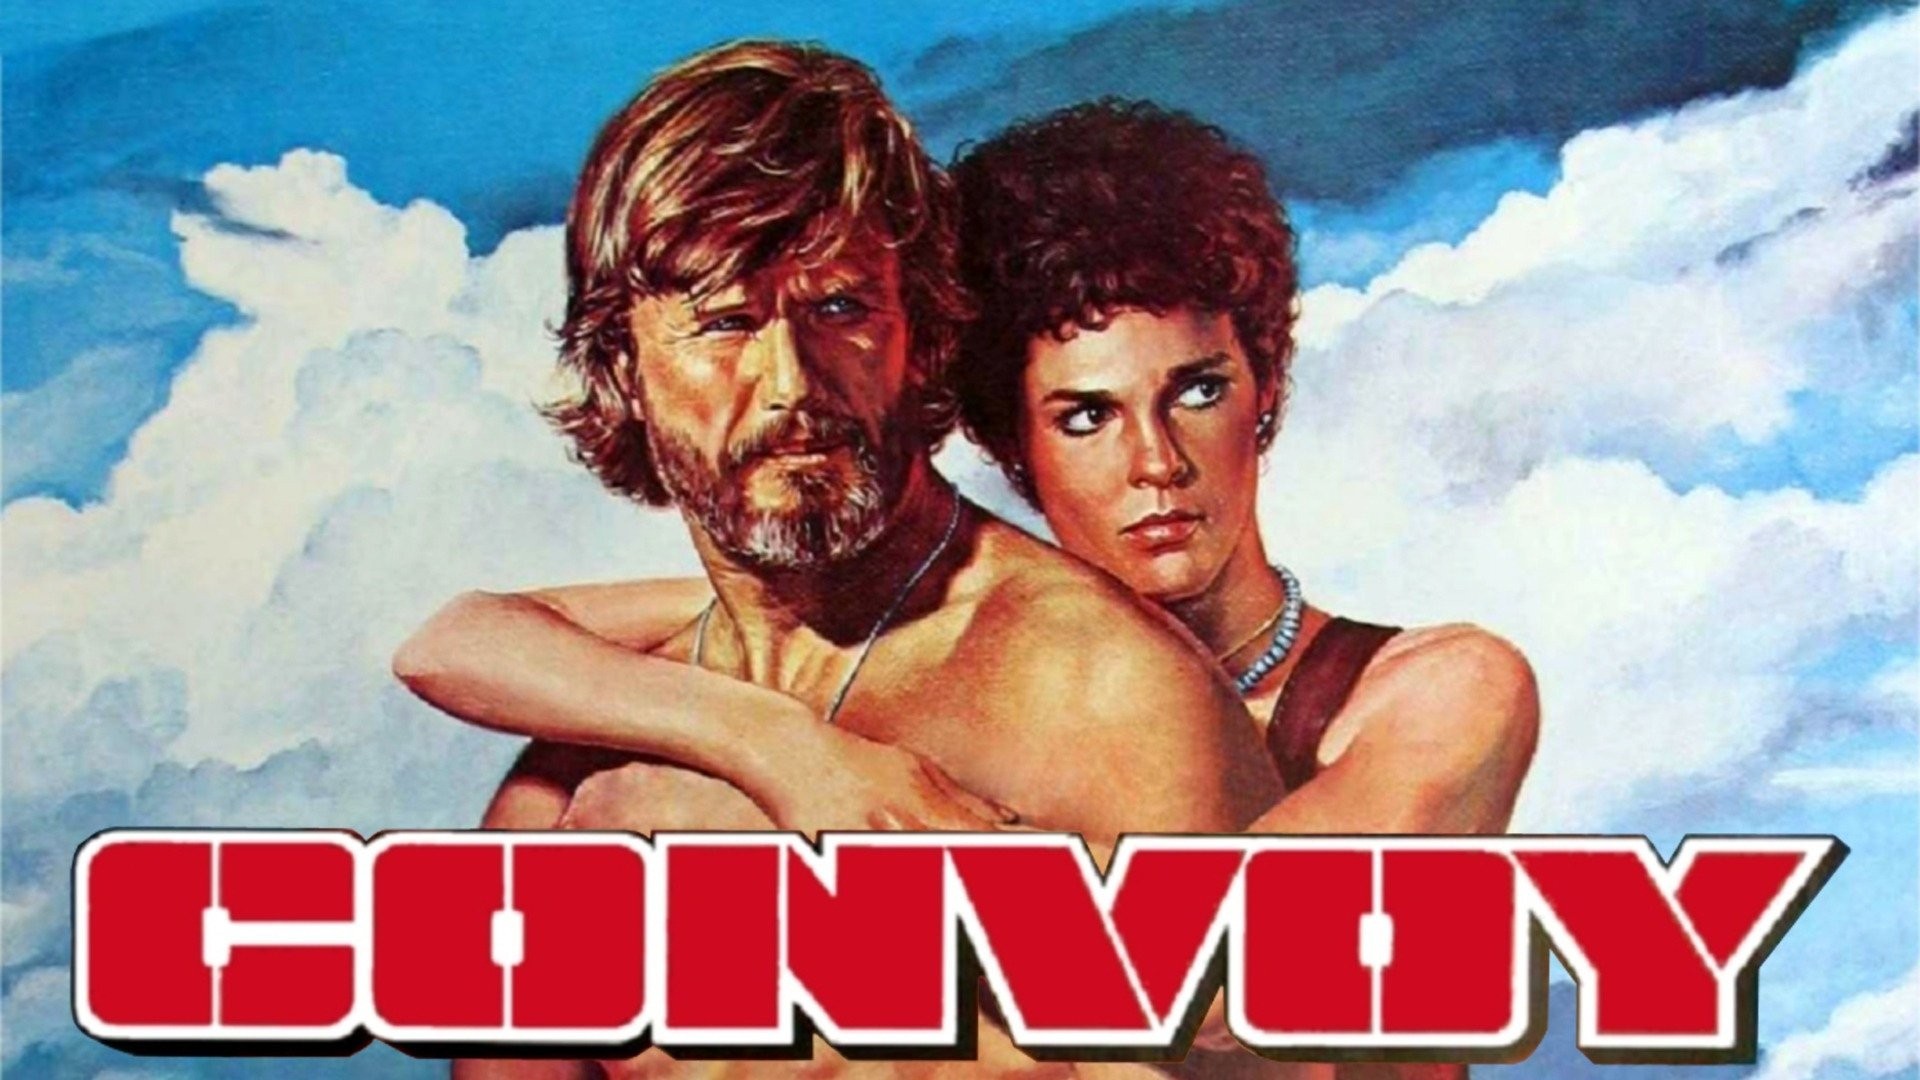 Convoy on X: #MondayMovies is back to decide which famous movie